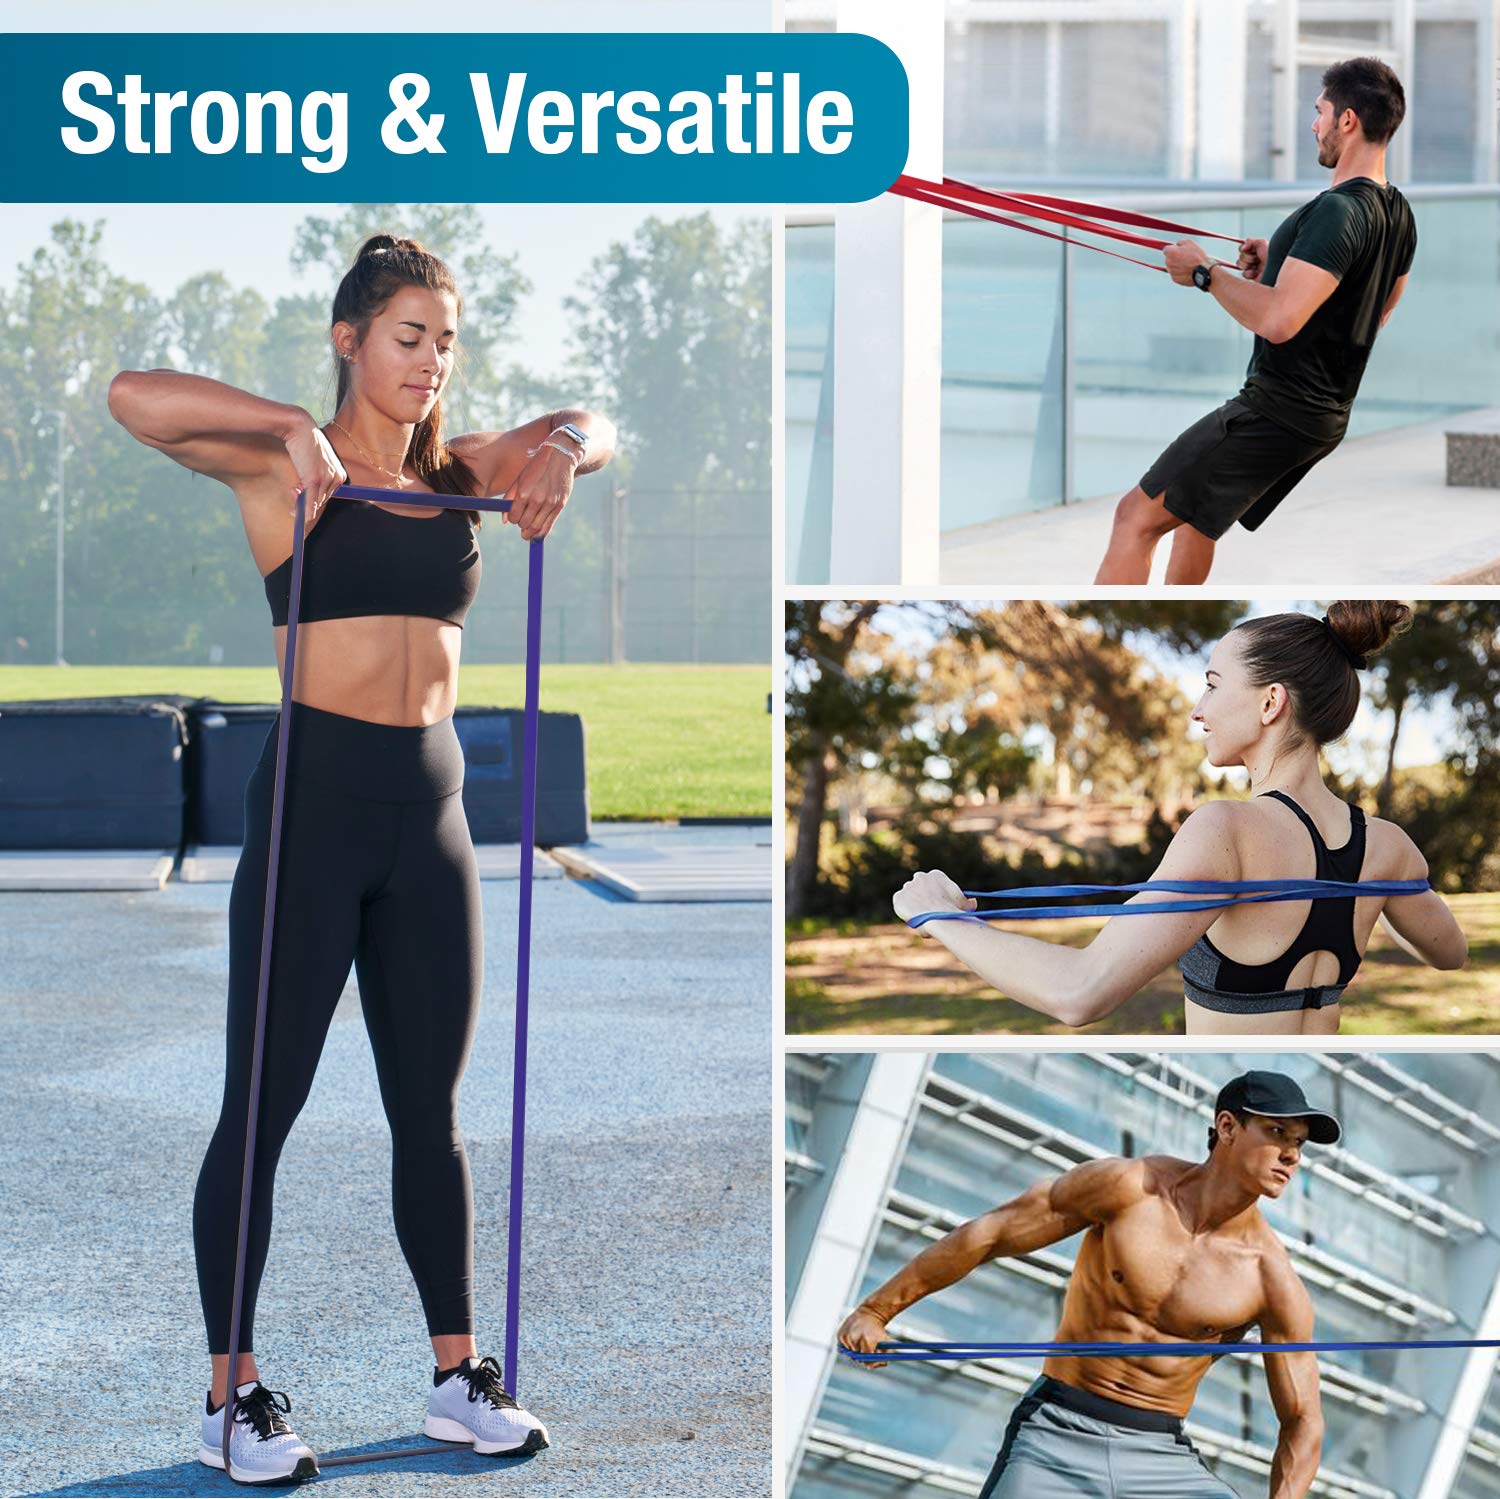 Beenax Resistance Bands Pull Up Assist Bands Set - Thick, Heavy Different Levels Workout Exercise Bands for CrossFit, Powerlifting, Muscle and Strength Training, Stretching, Mobility, Yoga - Men Women